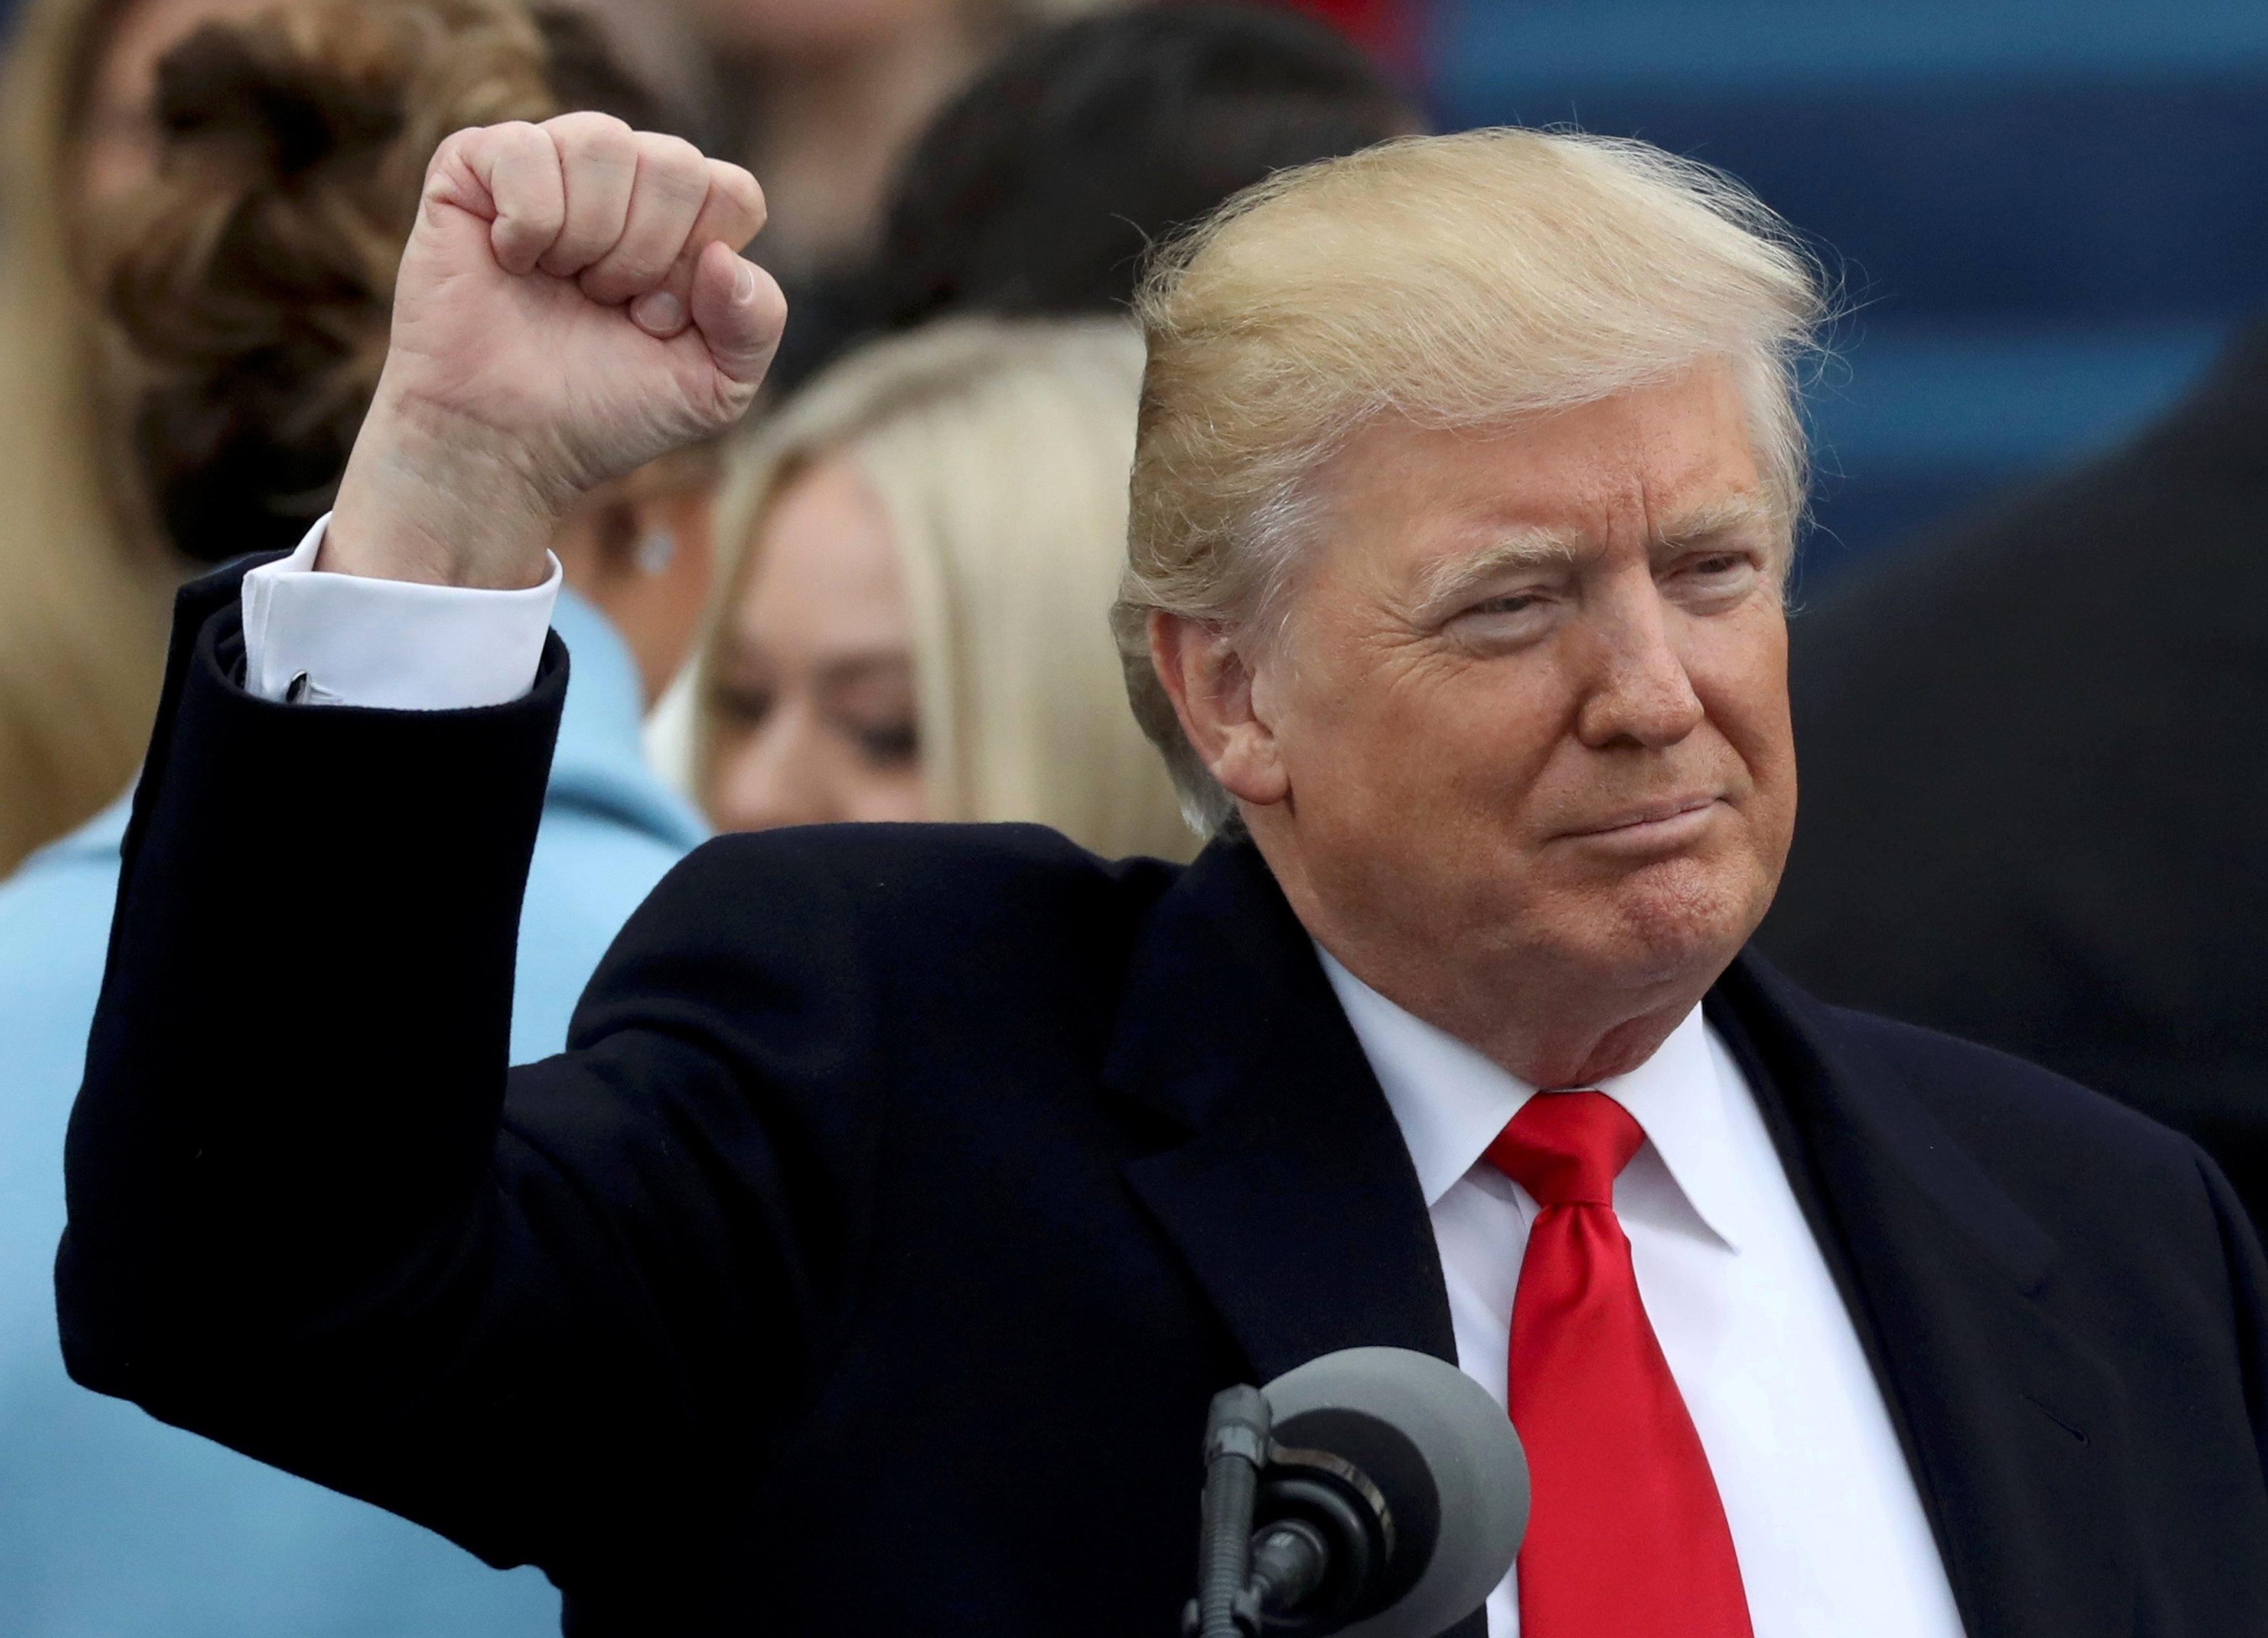 Donald Trump is sworn in as the 45th US president